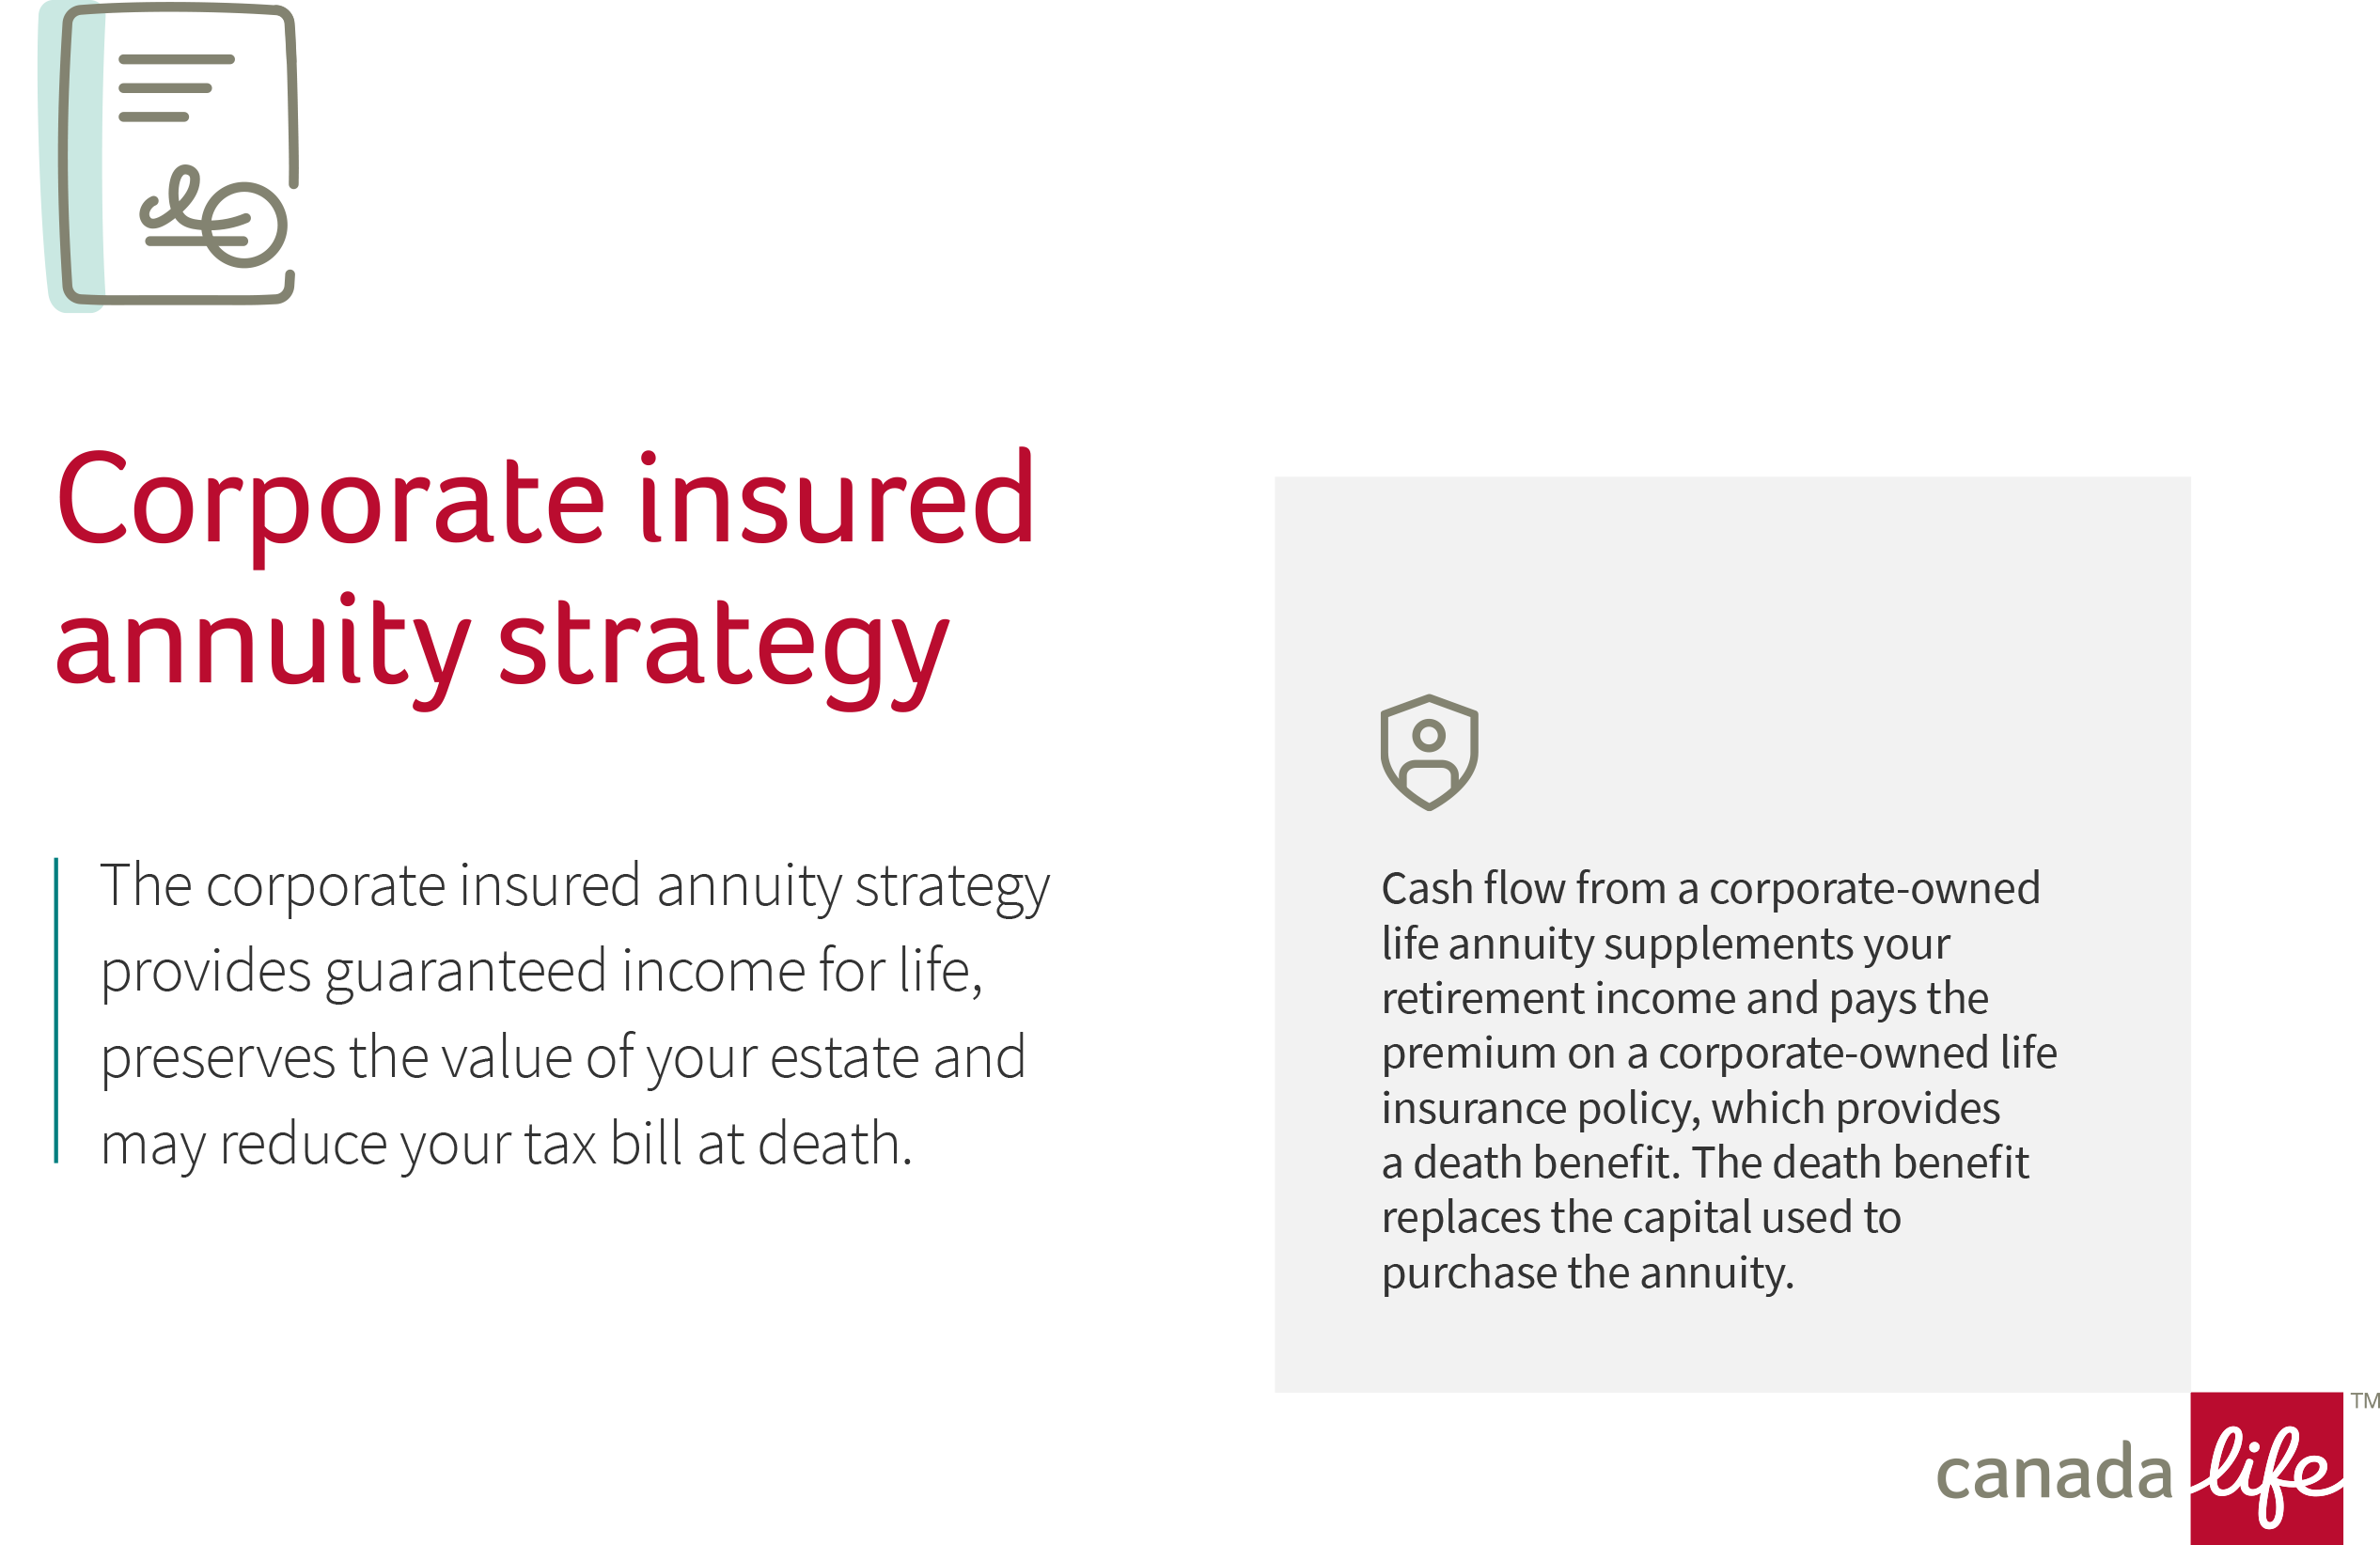 Corporate insured annuity strategy image